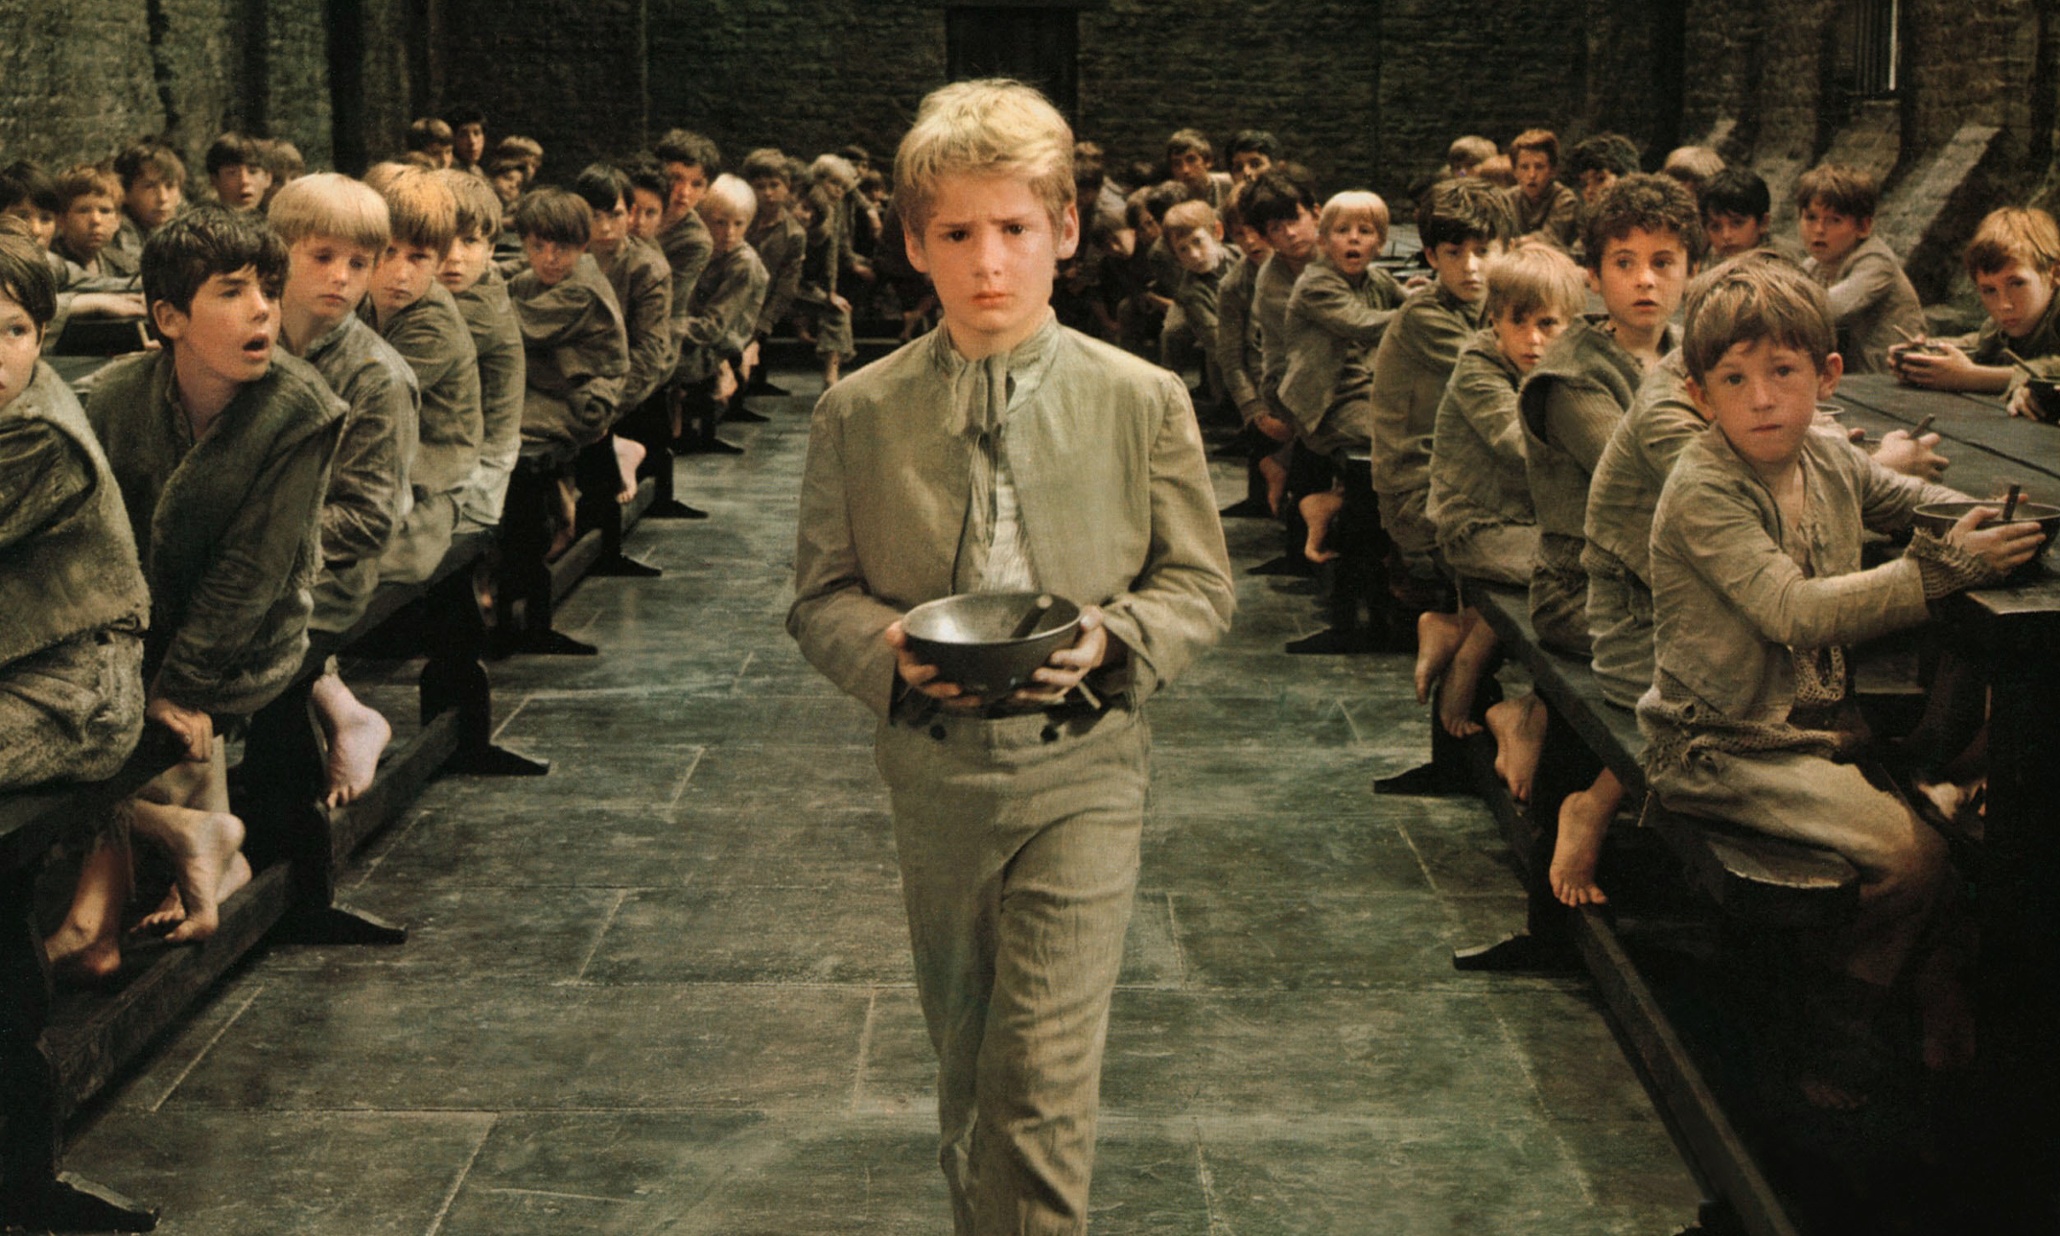 MARK LESTER
Film 'OLIVER!' (1968)
Directed By CAROL REED
26 September 1968
CTB5924
Allstar/Cinetext/ROM
**WARNING** This photograph can only be reproduced by publications in conjunction with the promotion of the above film. For Editorial Use Only